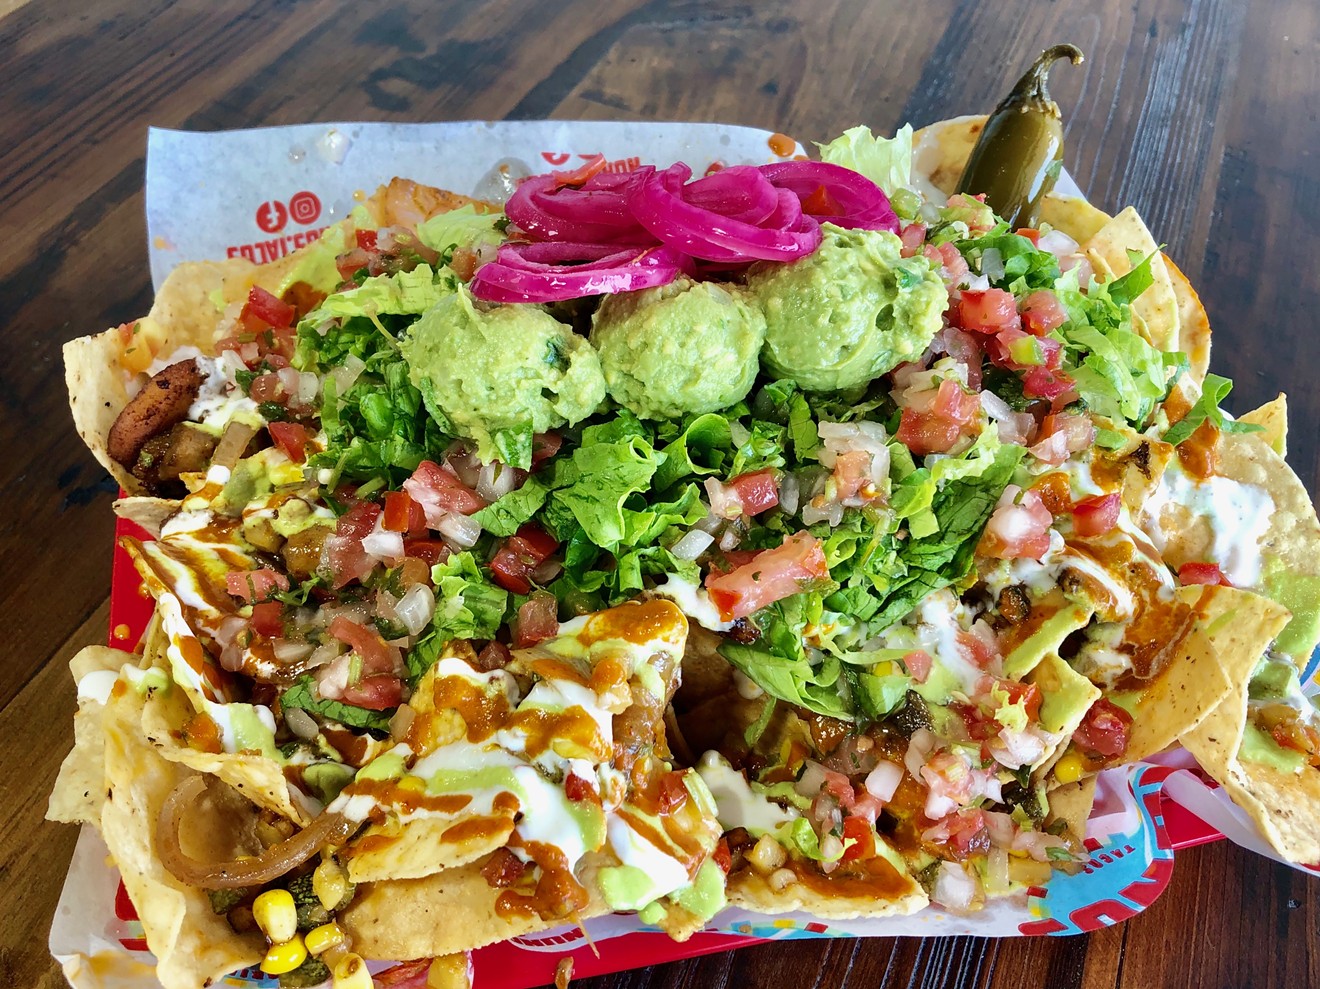 Loaded nachos at Nuno’s Tacos and Vegmex Grill